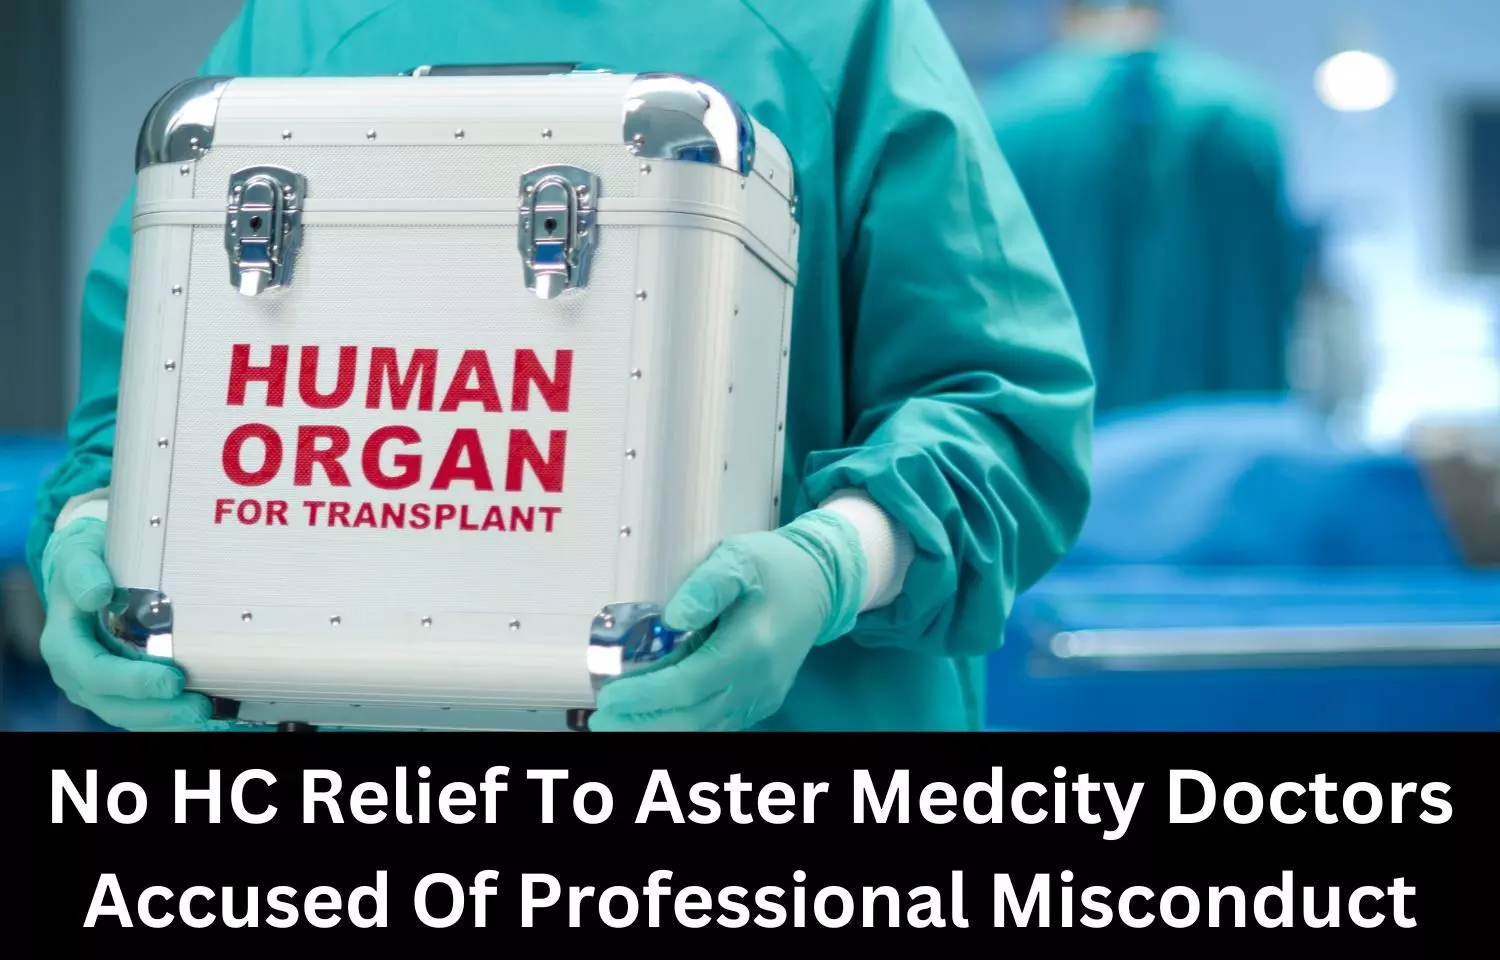 Medical Council will decide: No HC relief to Aster Medcity doctors accused of professional misconduct while organ transplantation